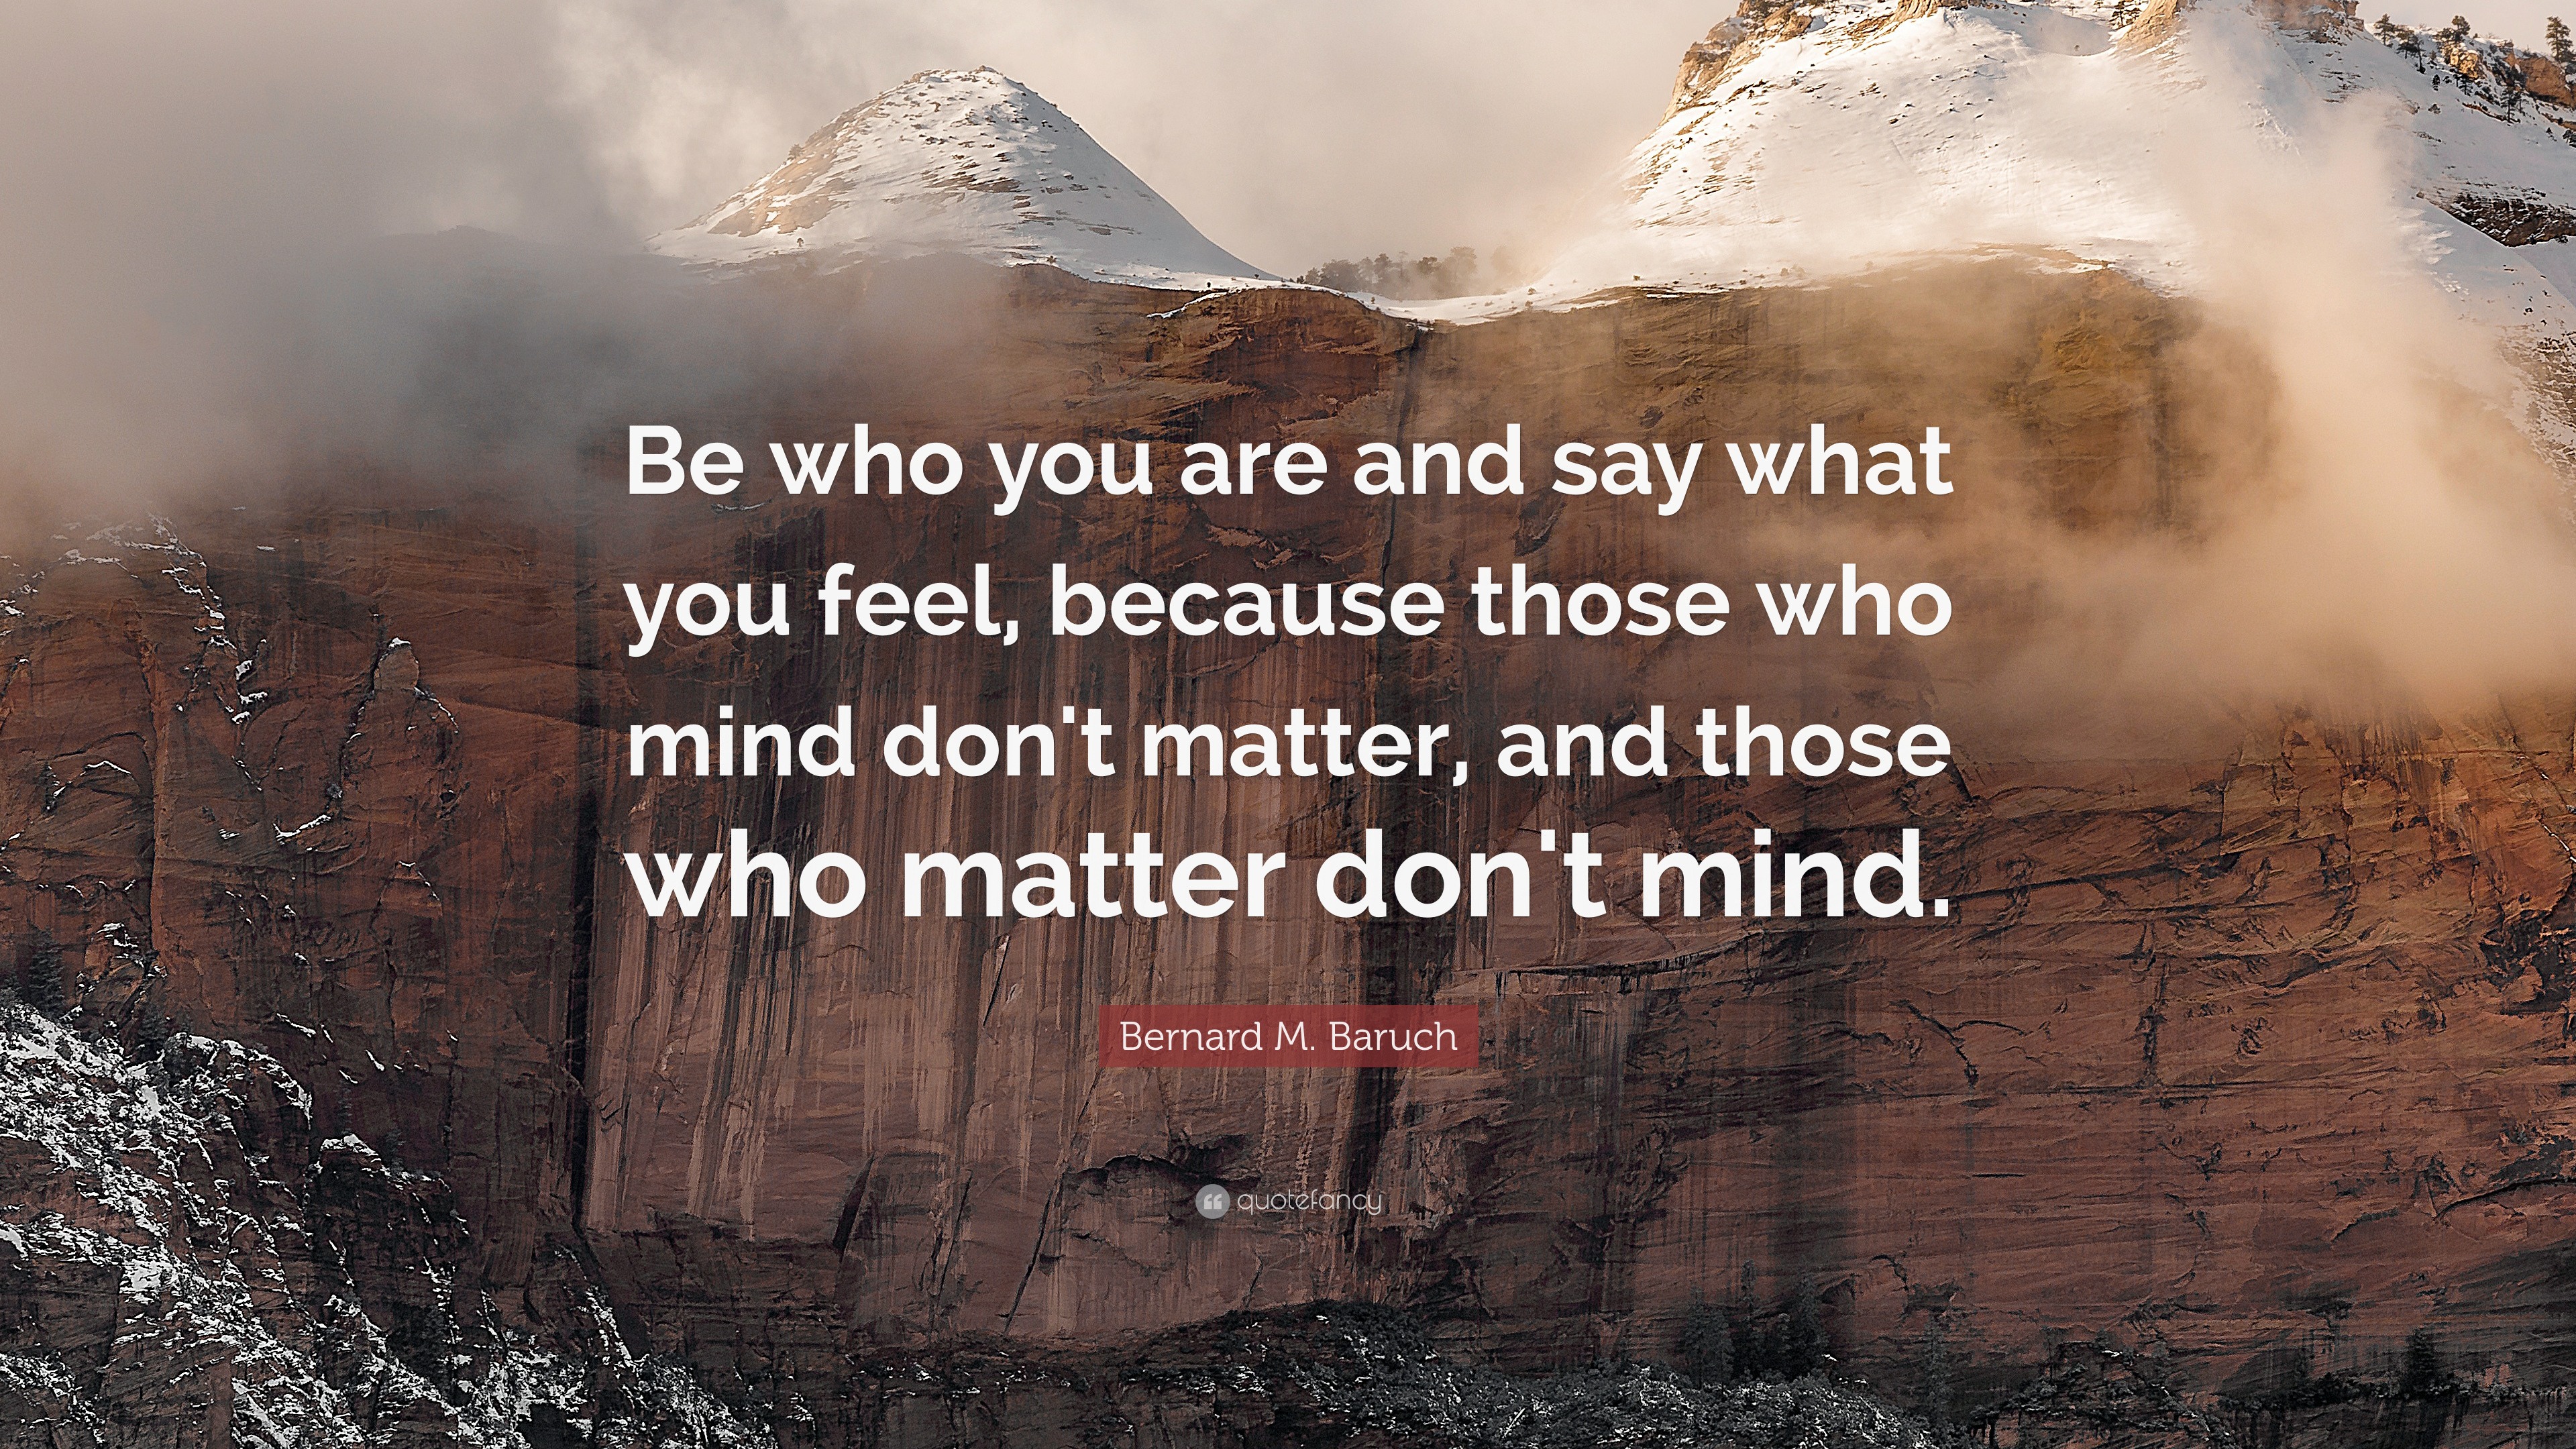 Inspiring Quote Print Motivational Quote Inspirational Print Bernard Baruch Quote Those who mind don't Matter Be Who You Are